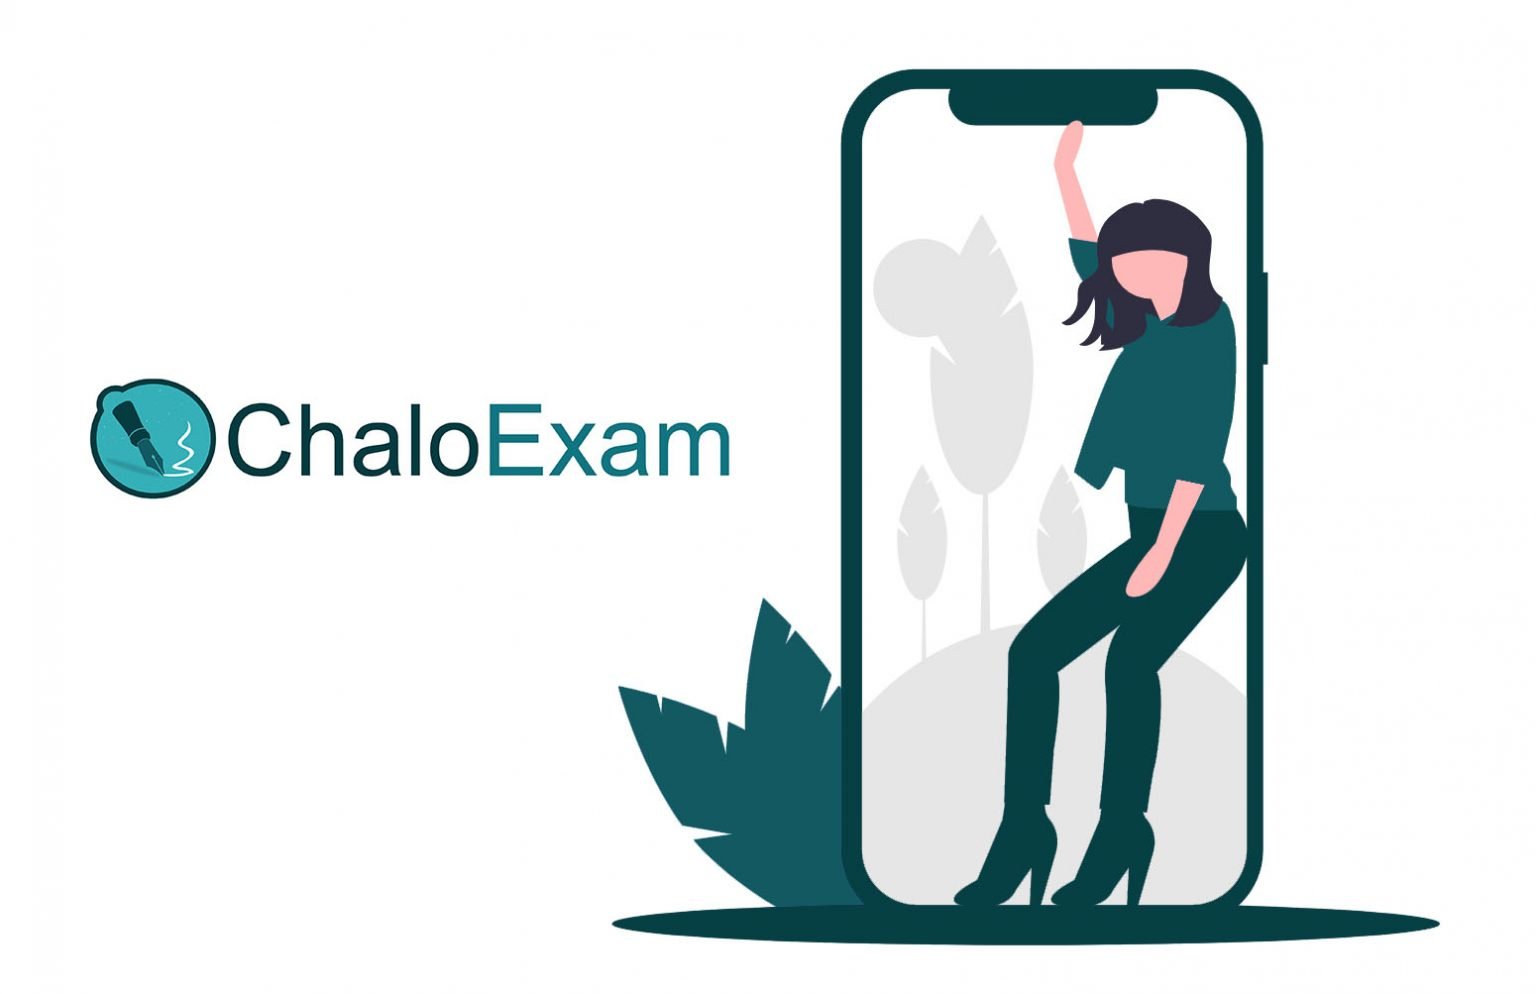 Who Is ChaloExam ?